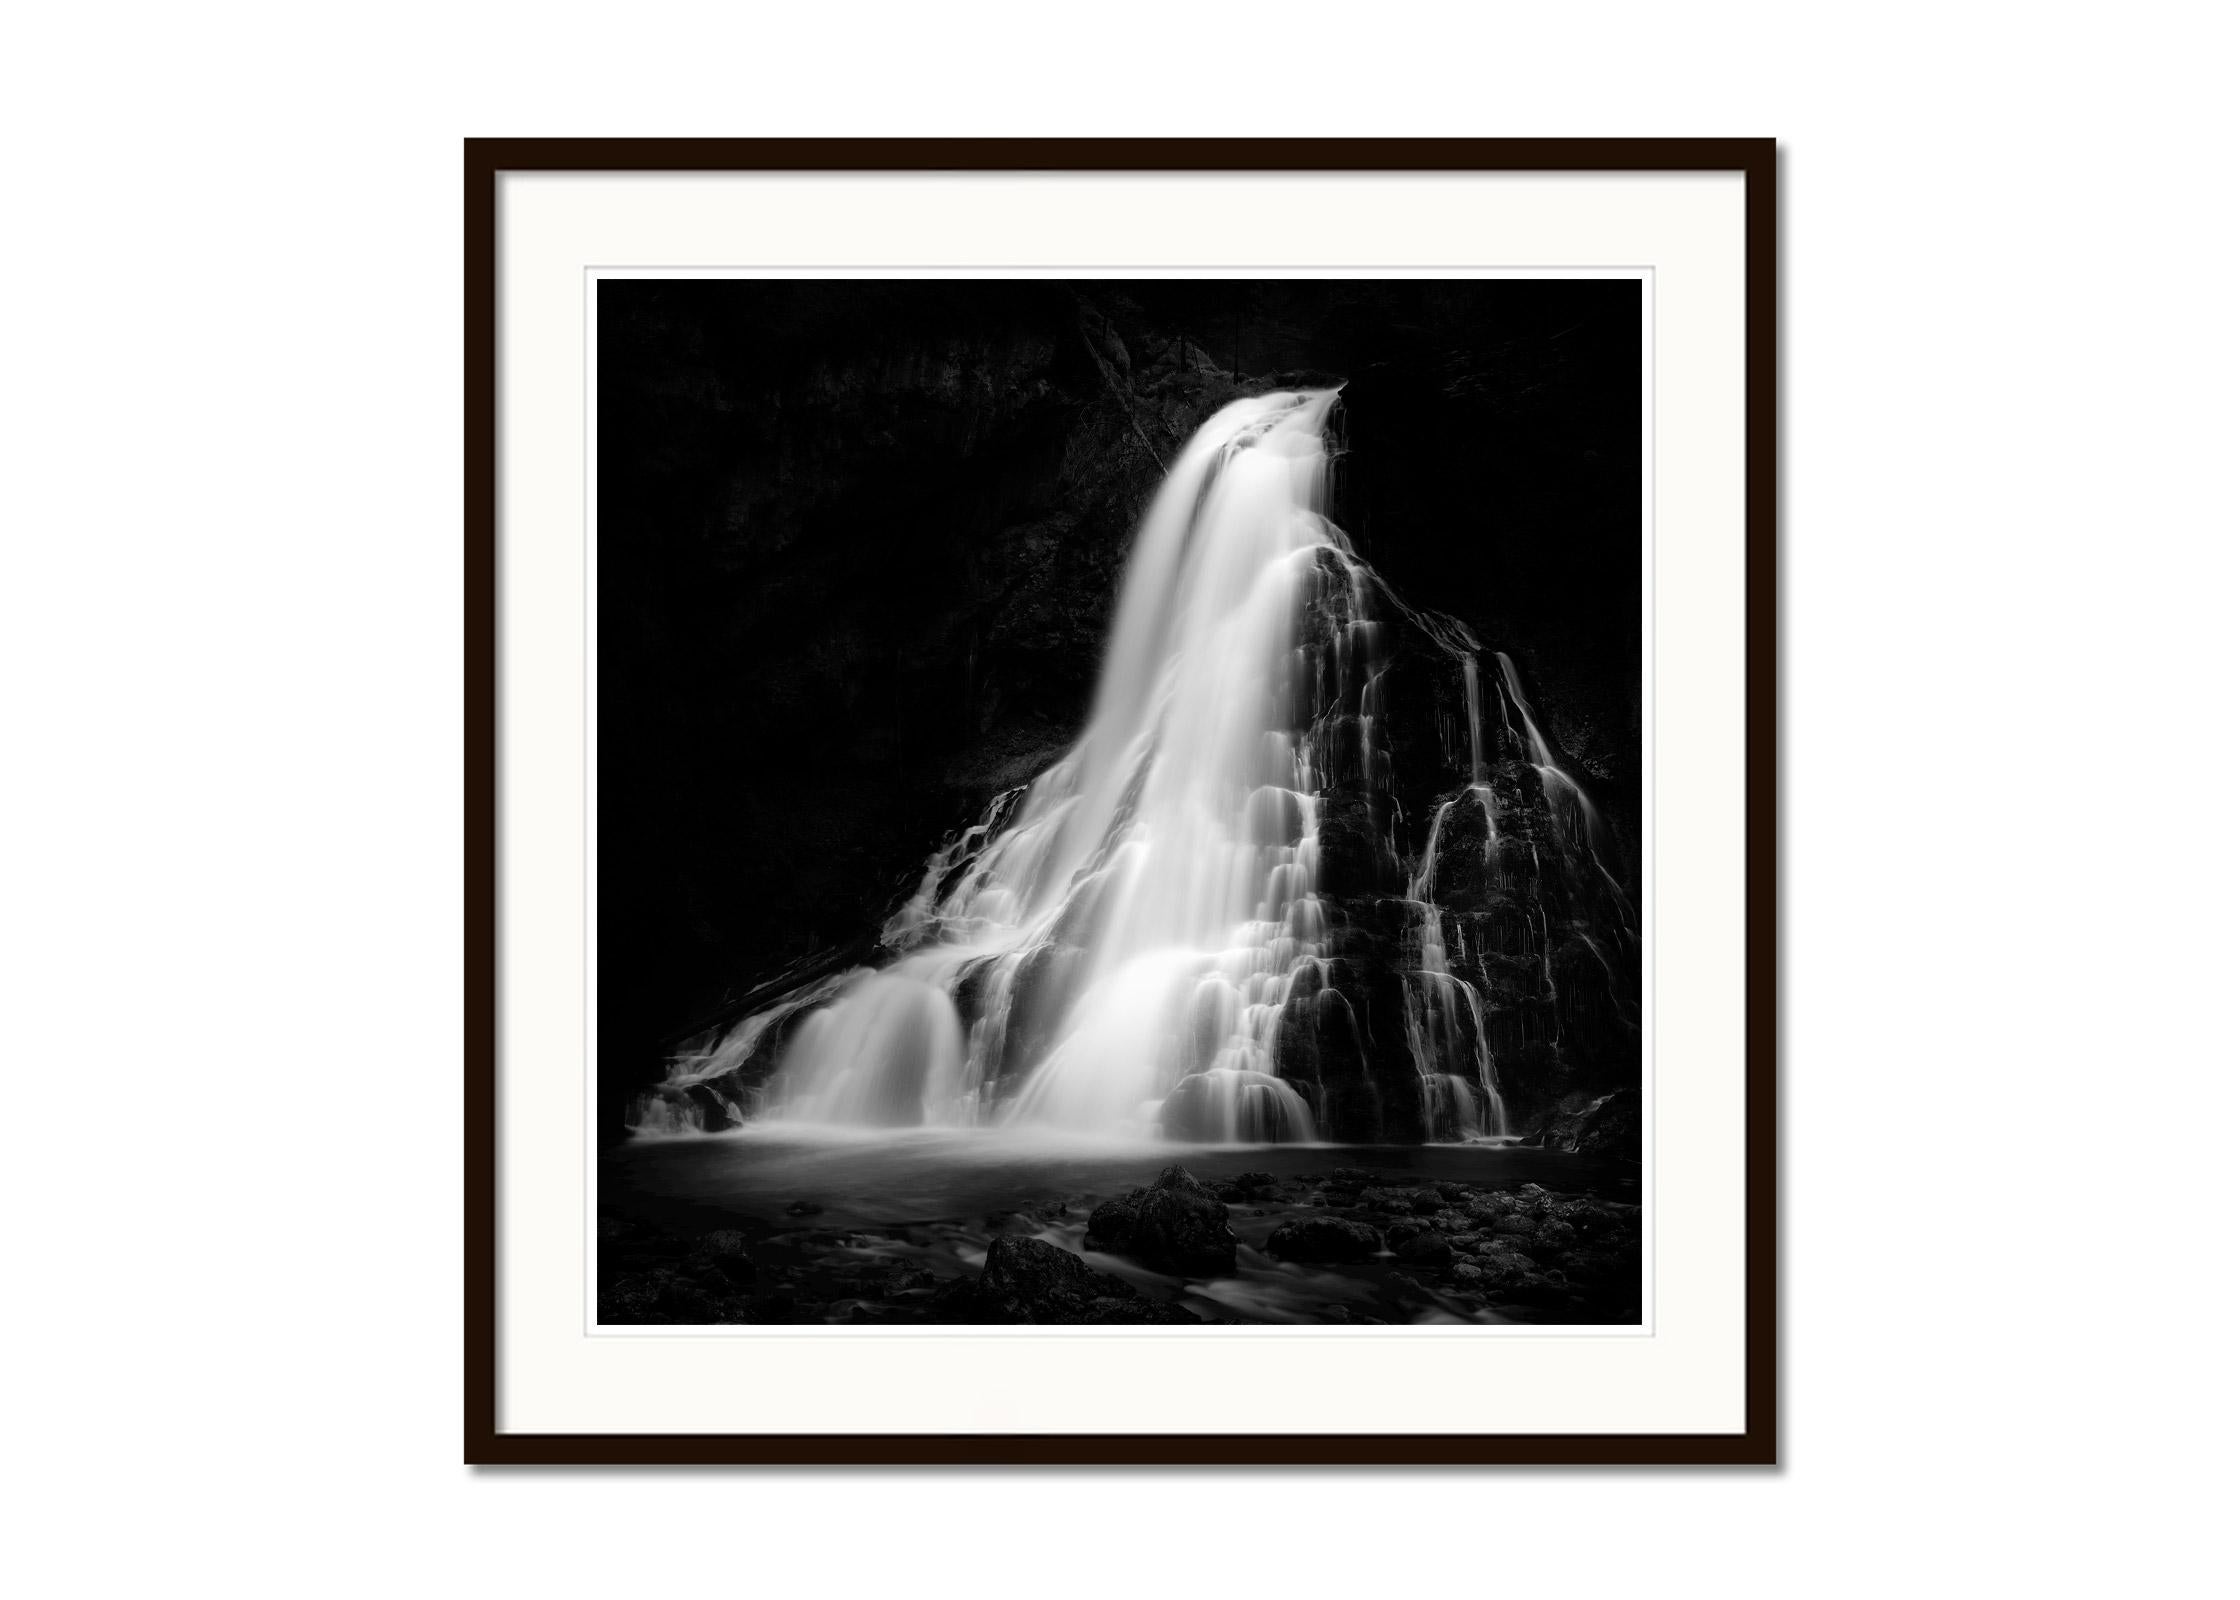 Golling Falls, waterfall, Austria, black and white photography, art landscape - Black Black and White Photograph by Gerald Berghammer